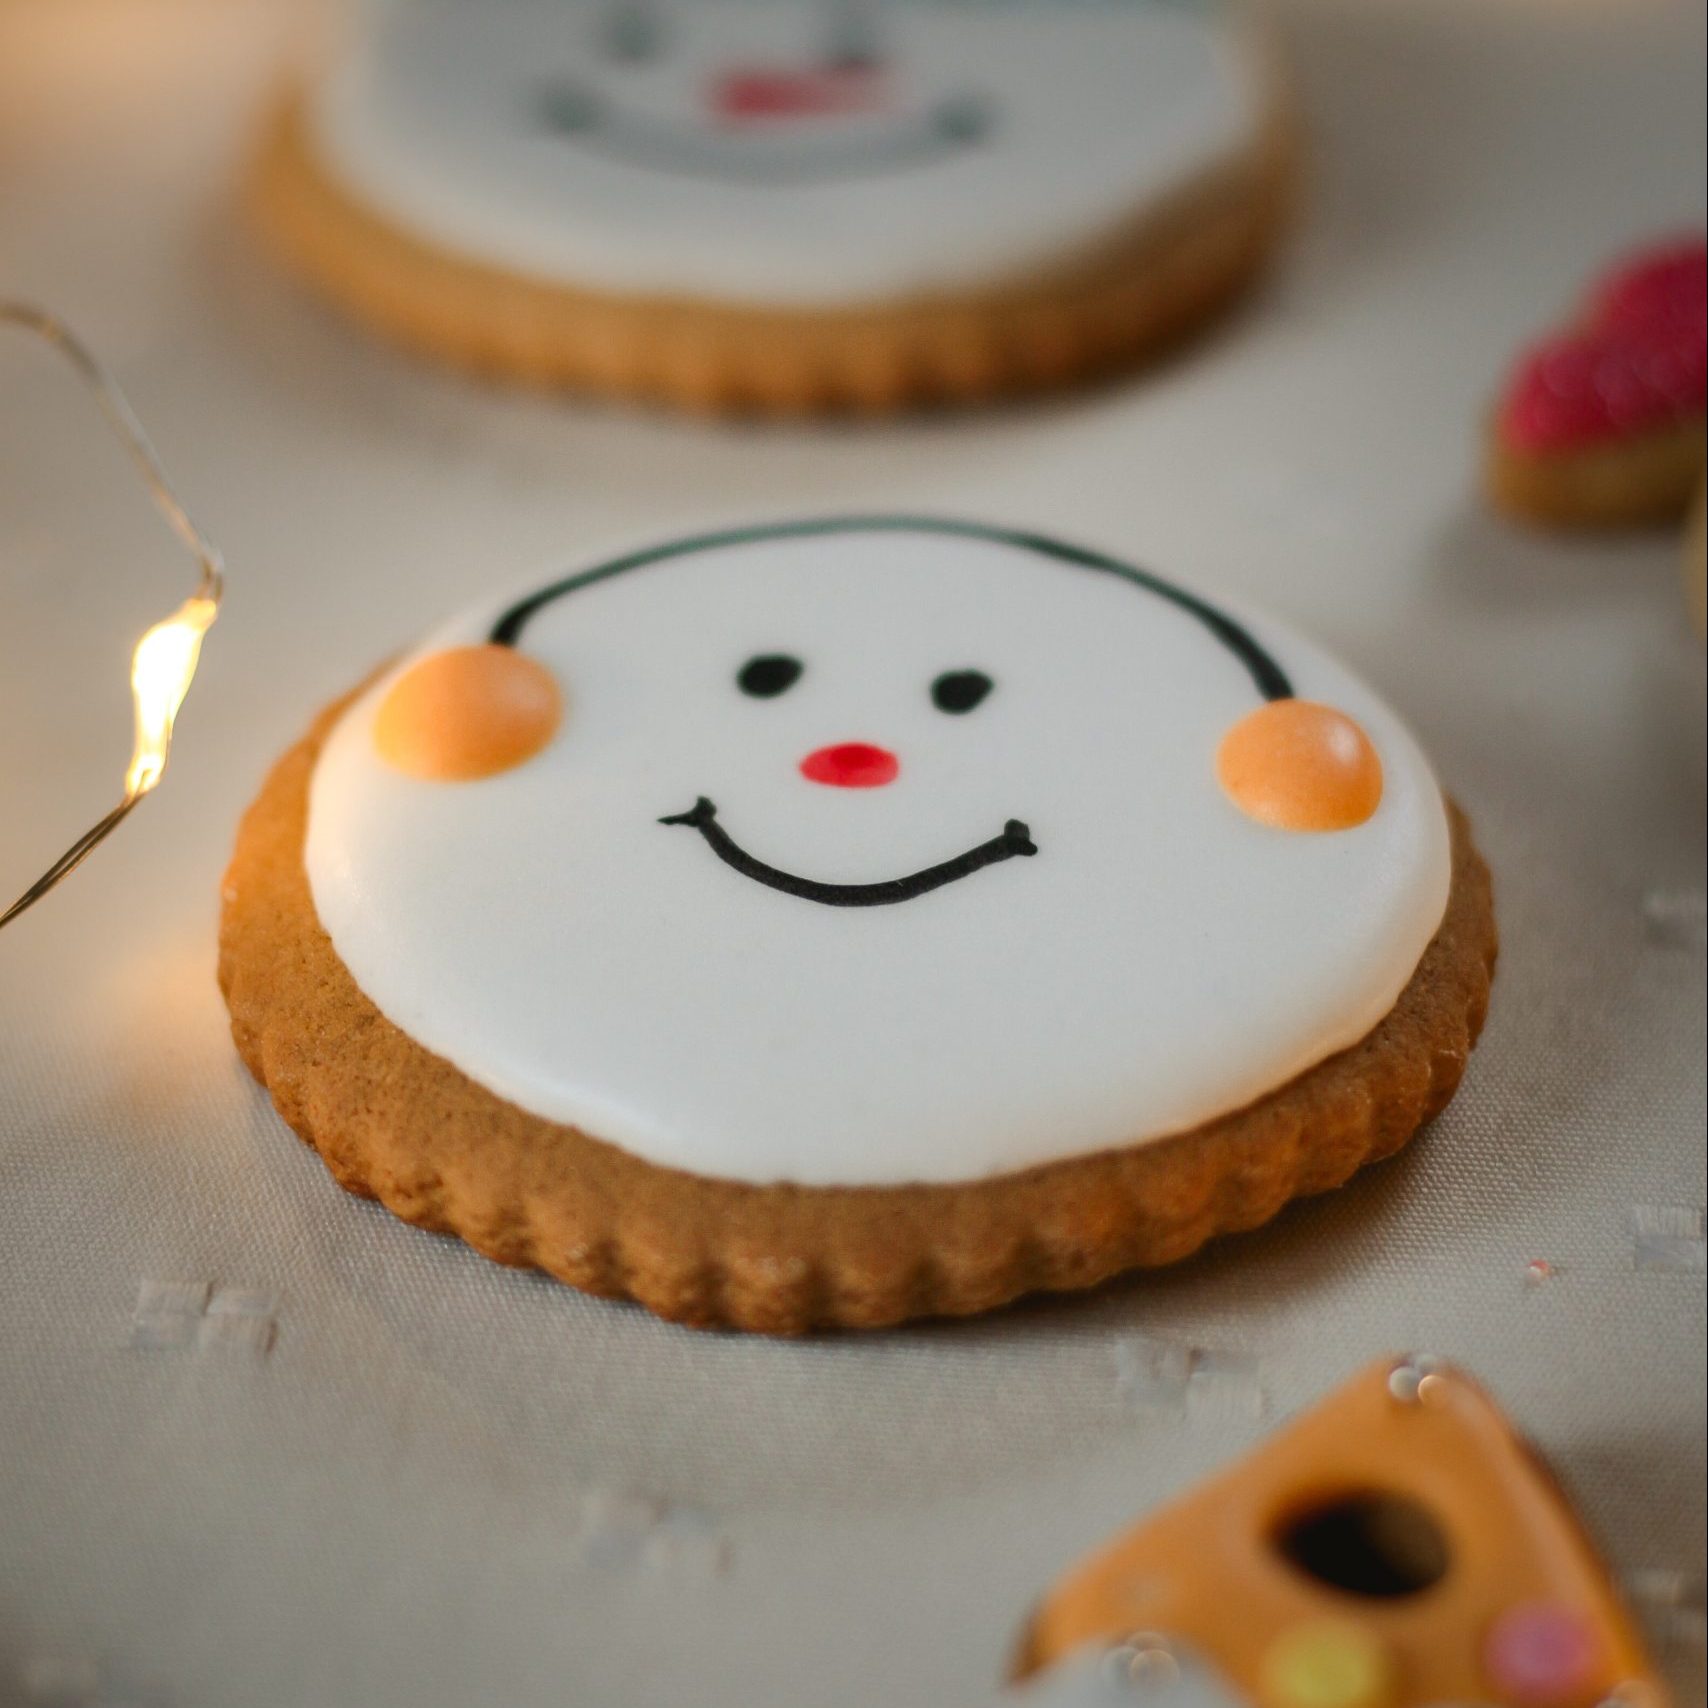 Picture of a Christmas cookie and a smiling face on it.